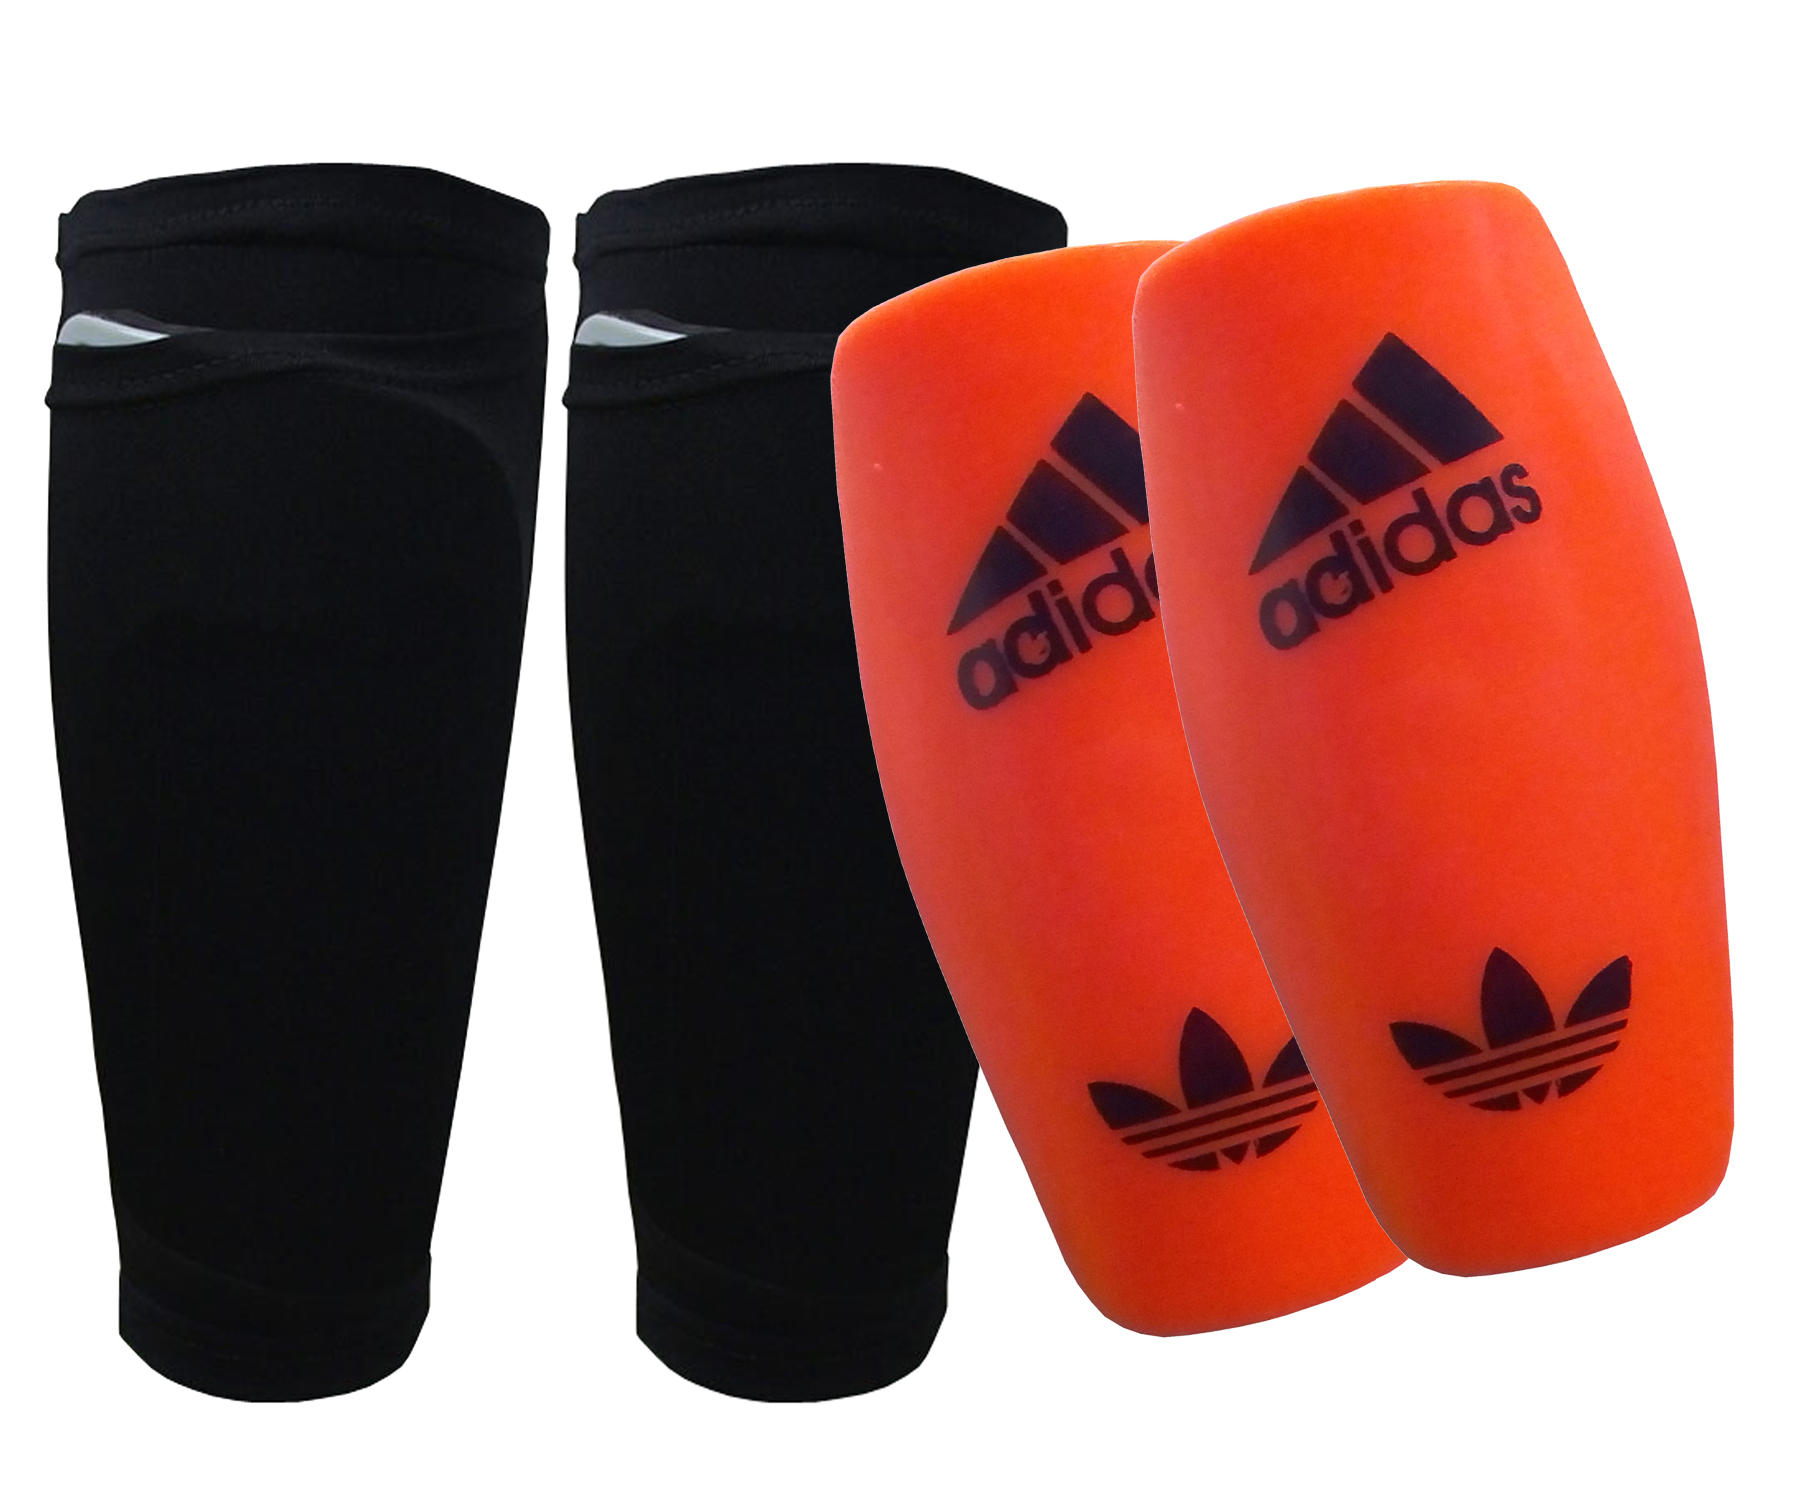 Download One Pair Soccer Shin Guard Holder Compression Sleeves ...